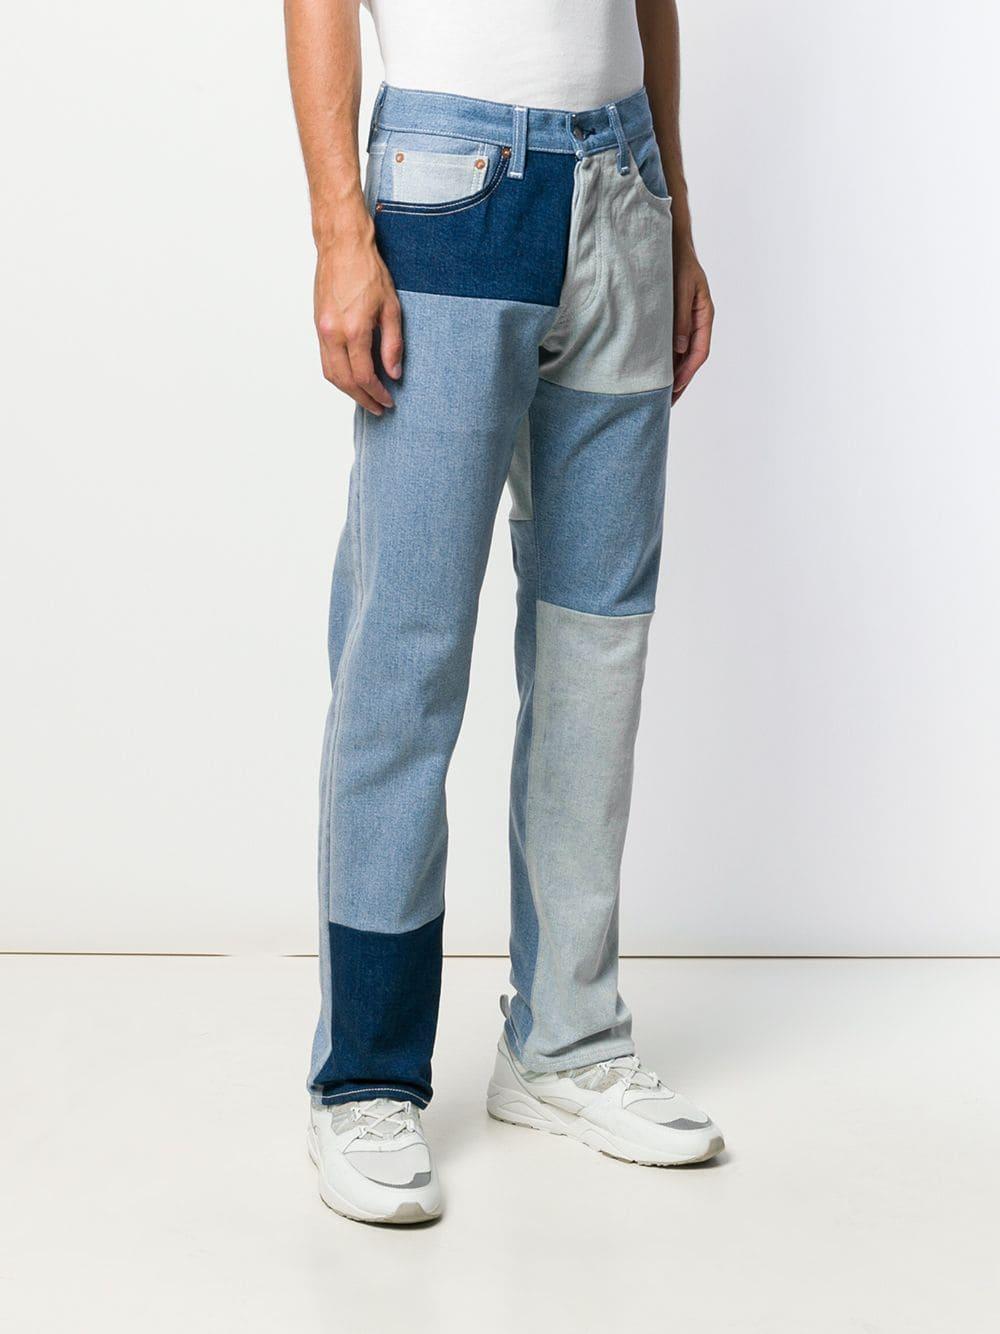 Levi's Patchwork Jeans in Blue for Men